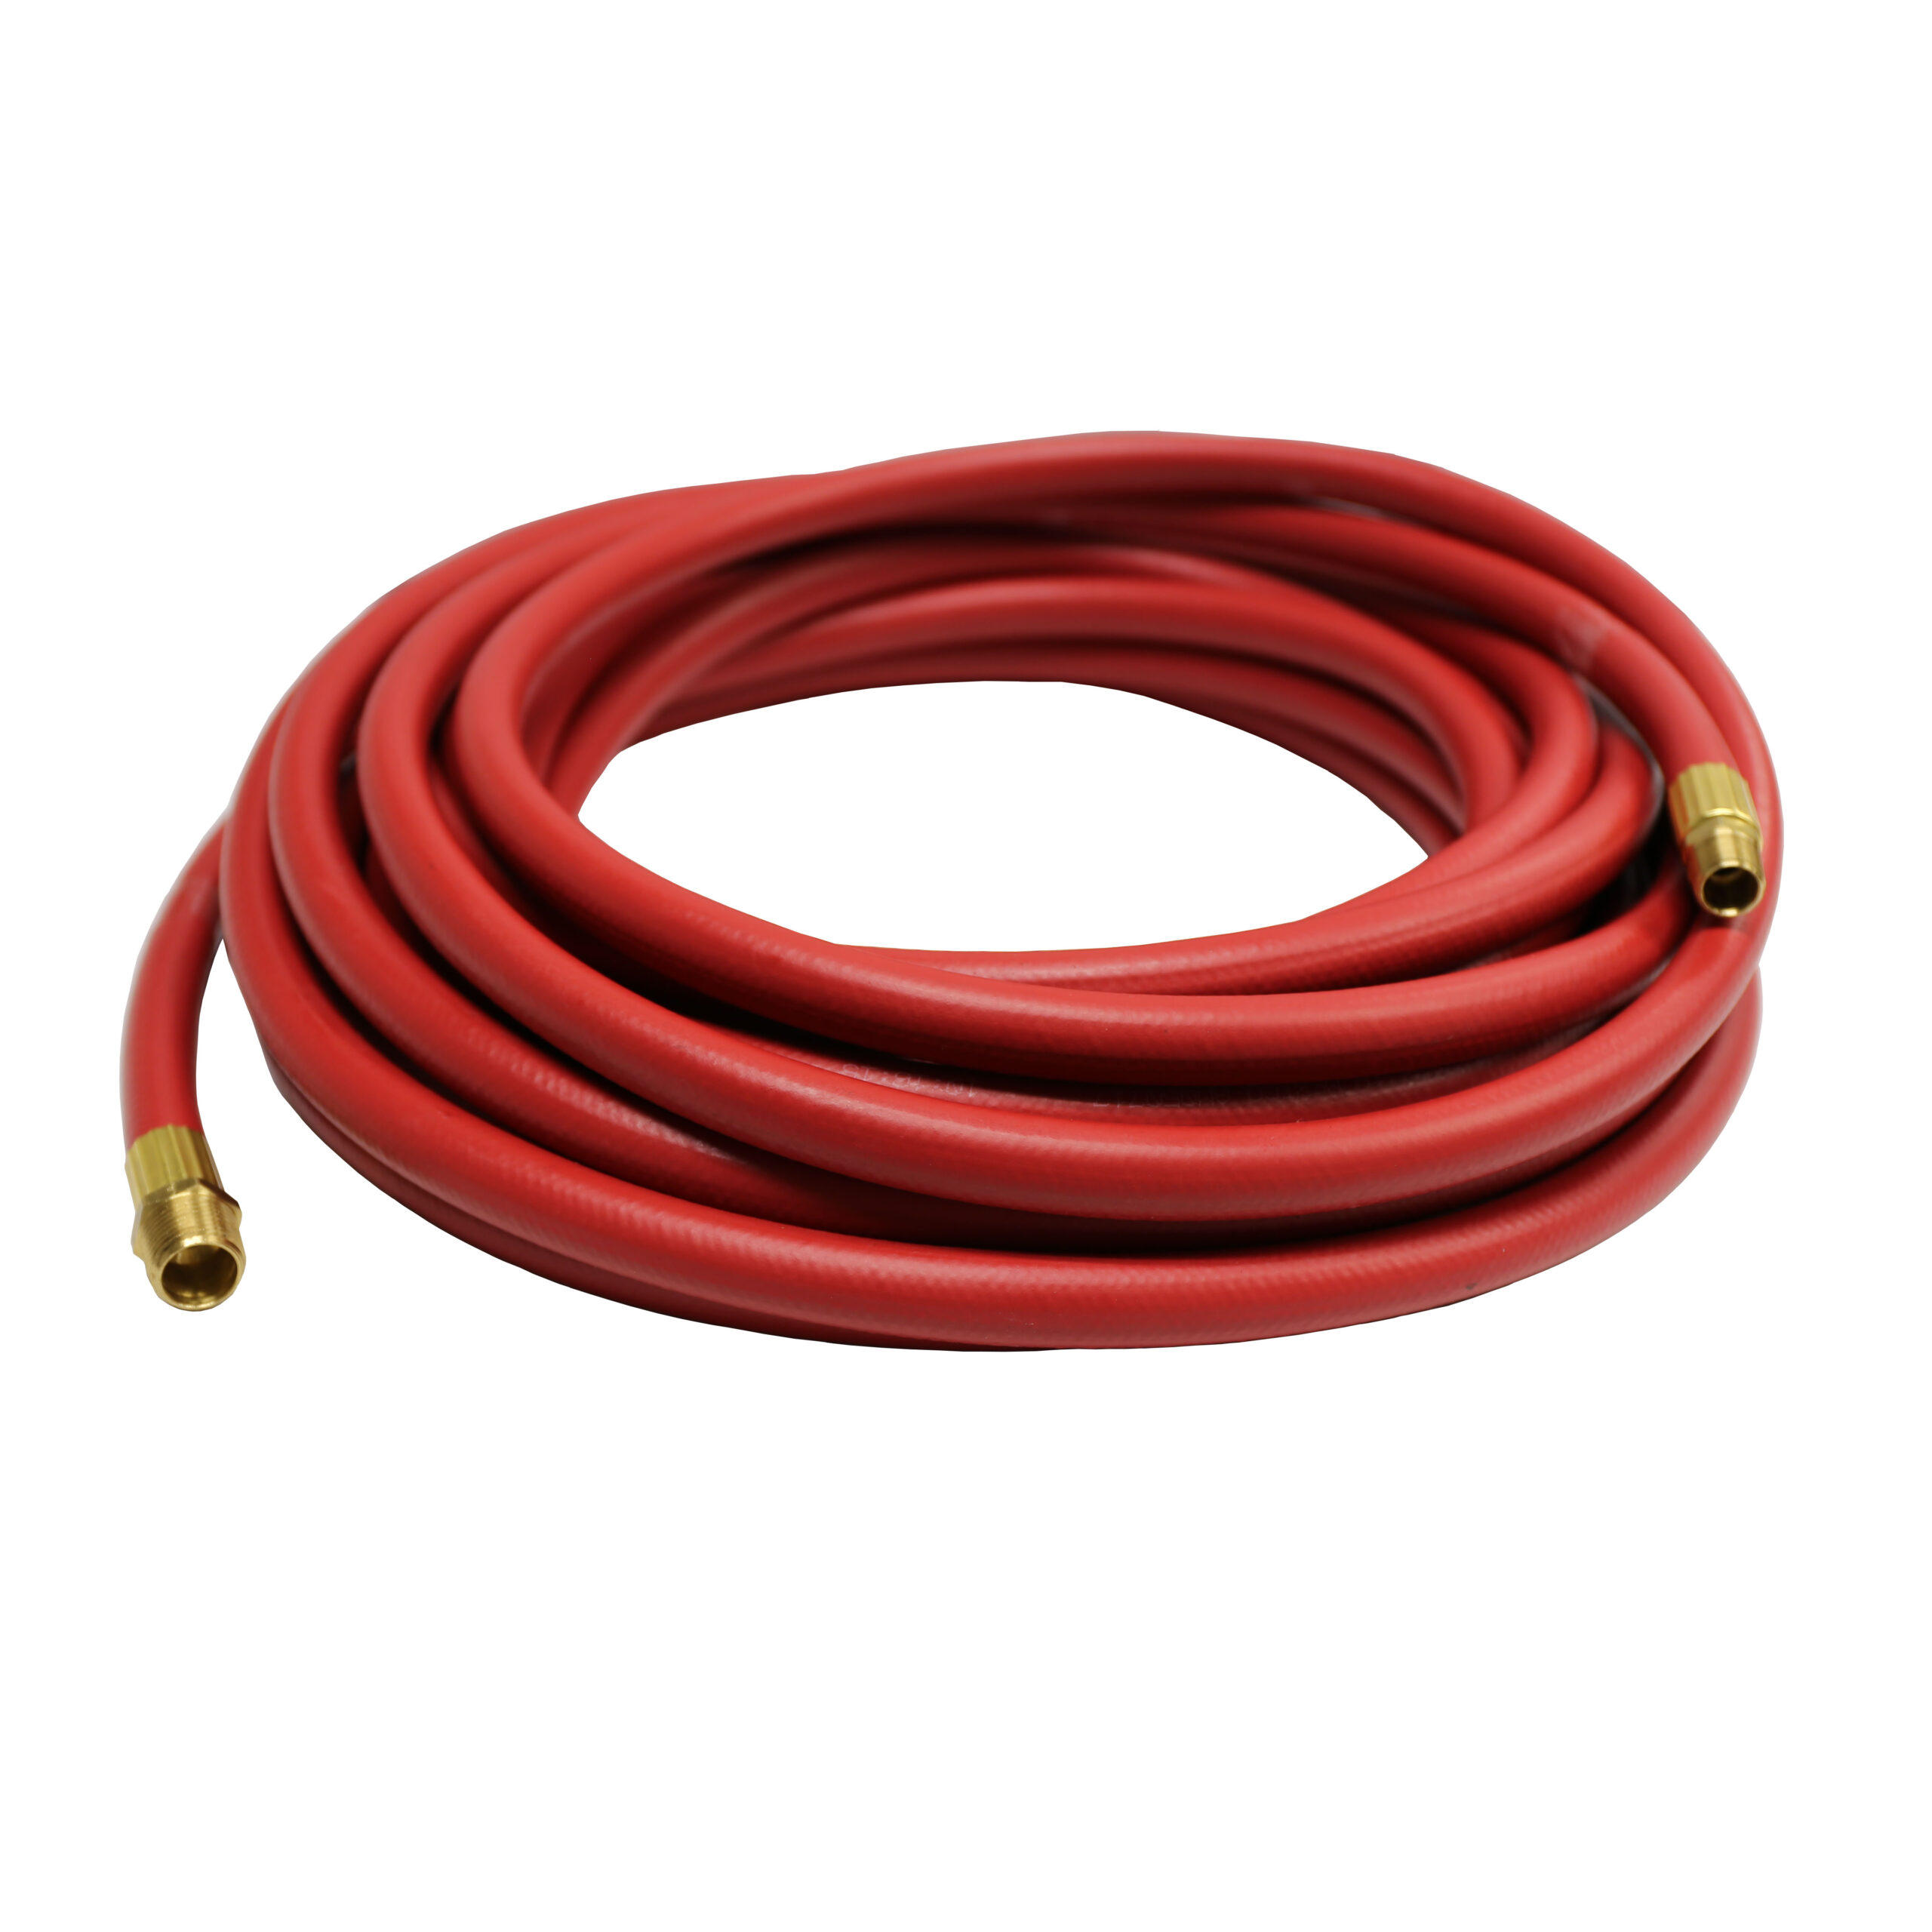 Reelcraft 601148-100 1/2" x 100' 300 psi Rubber Air Hose with 1/2" M-NPT 